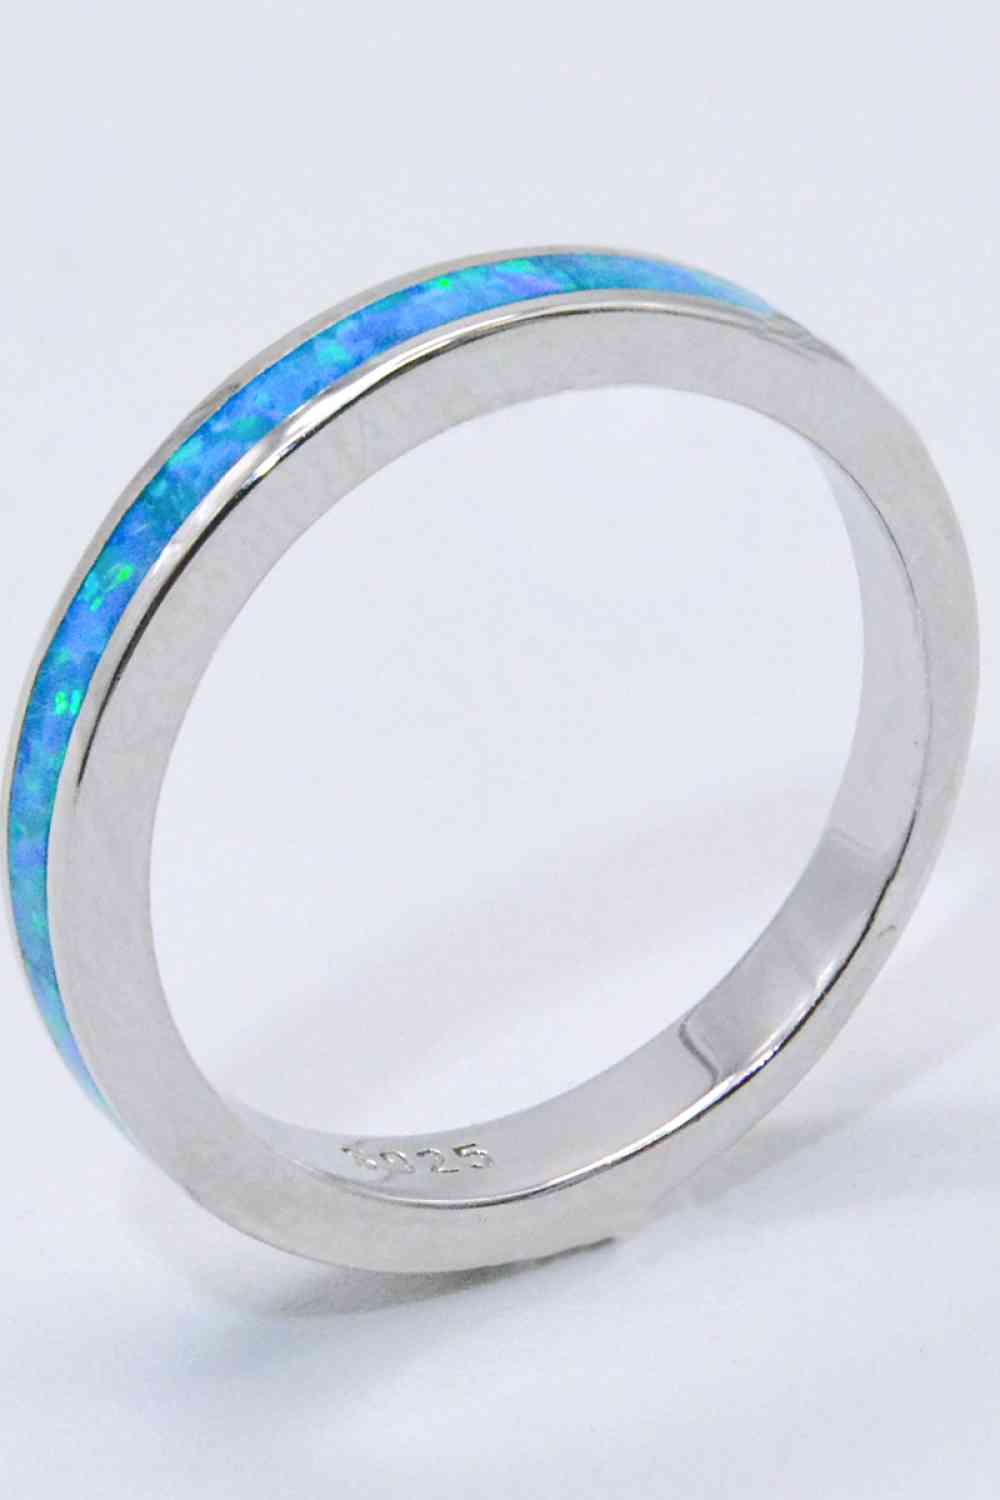 PLATNIUM PLATED 925 SILVER AND OPAL RING in Sky Blue